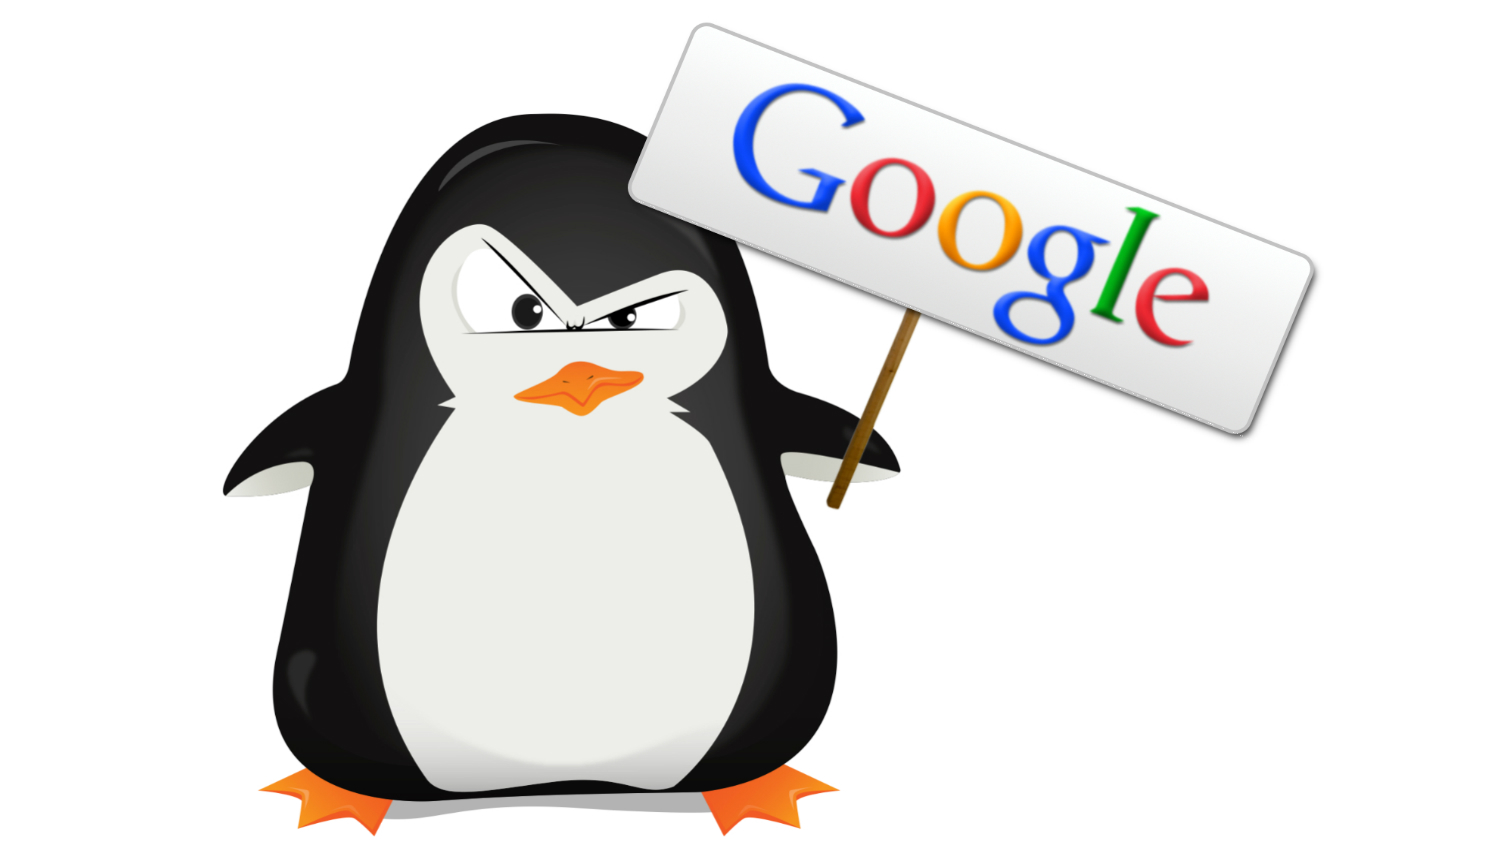 A Complete Insight on Google’s Fresh Penguin Updates During the Holiday Season